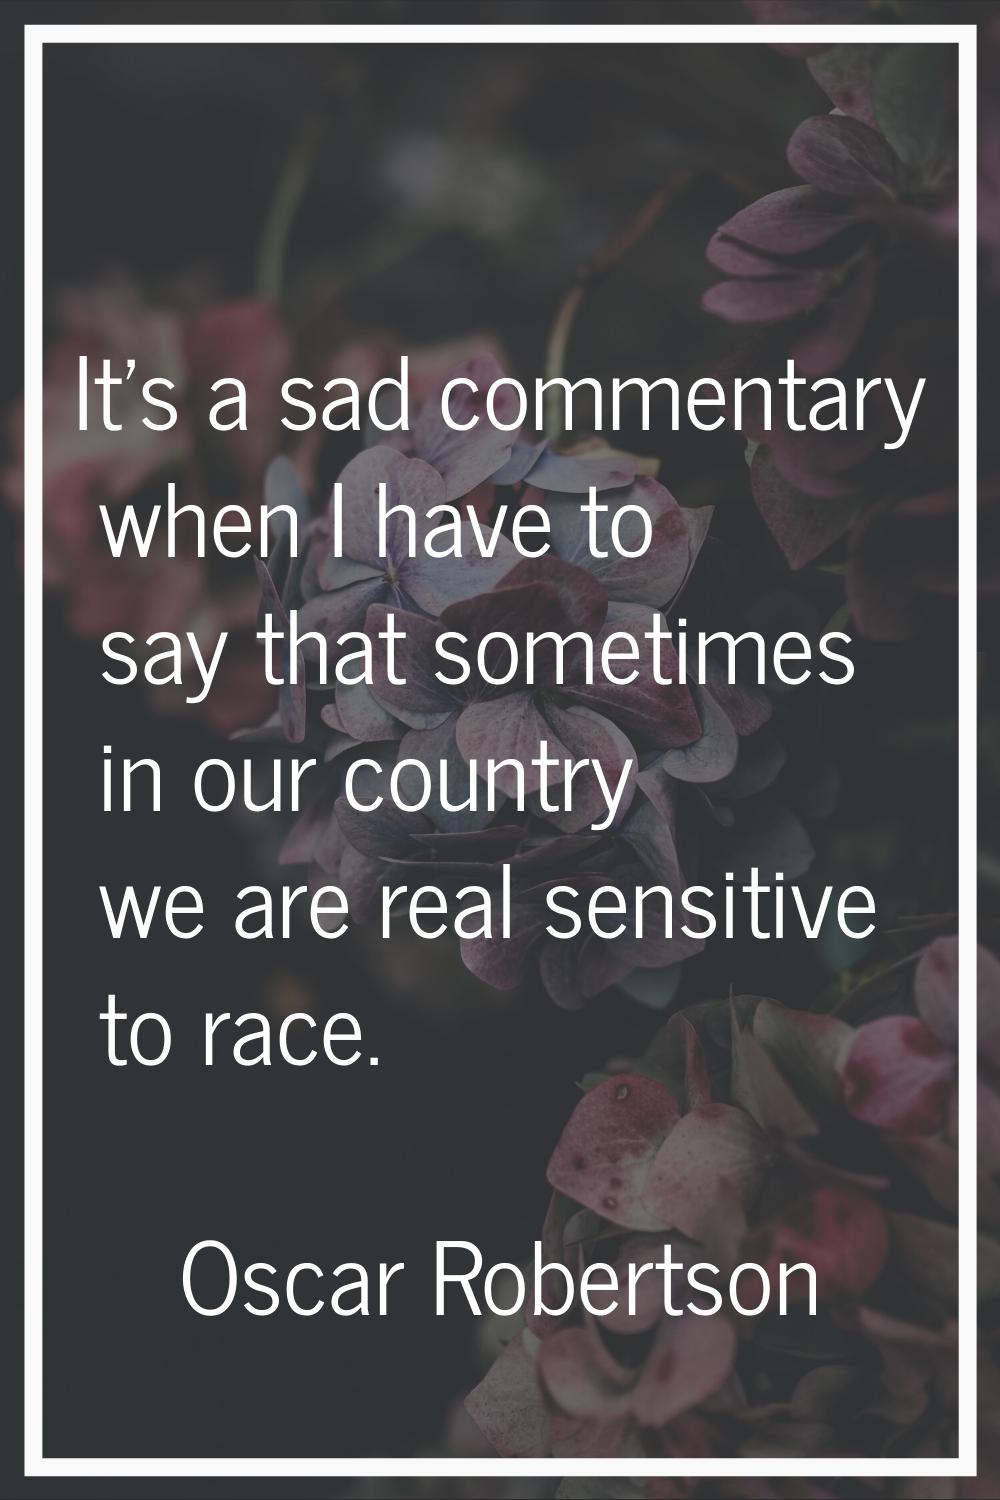 It's a sad commentary when I have to say that sometimes in our country we are real sensitive to rac